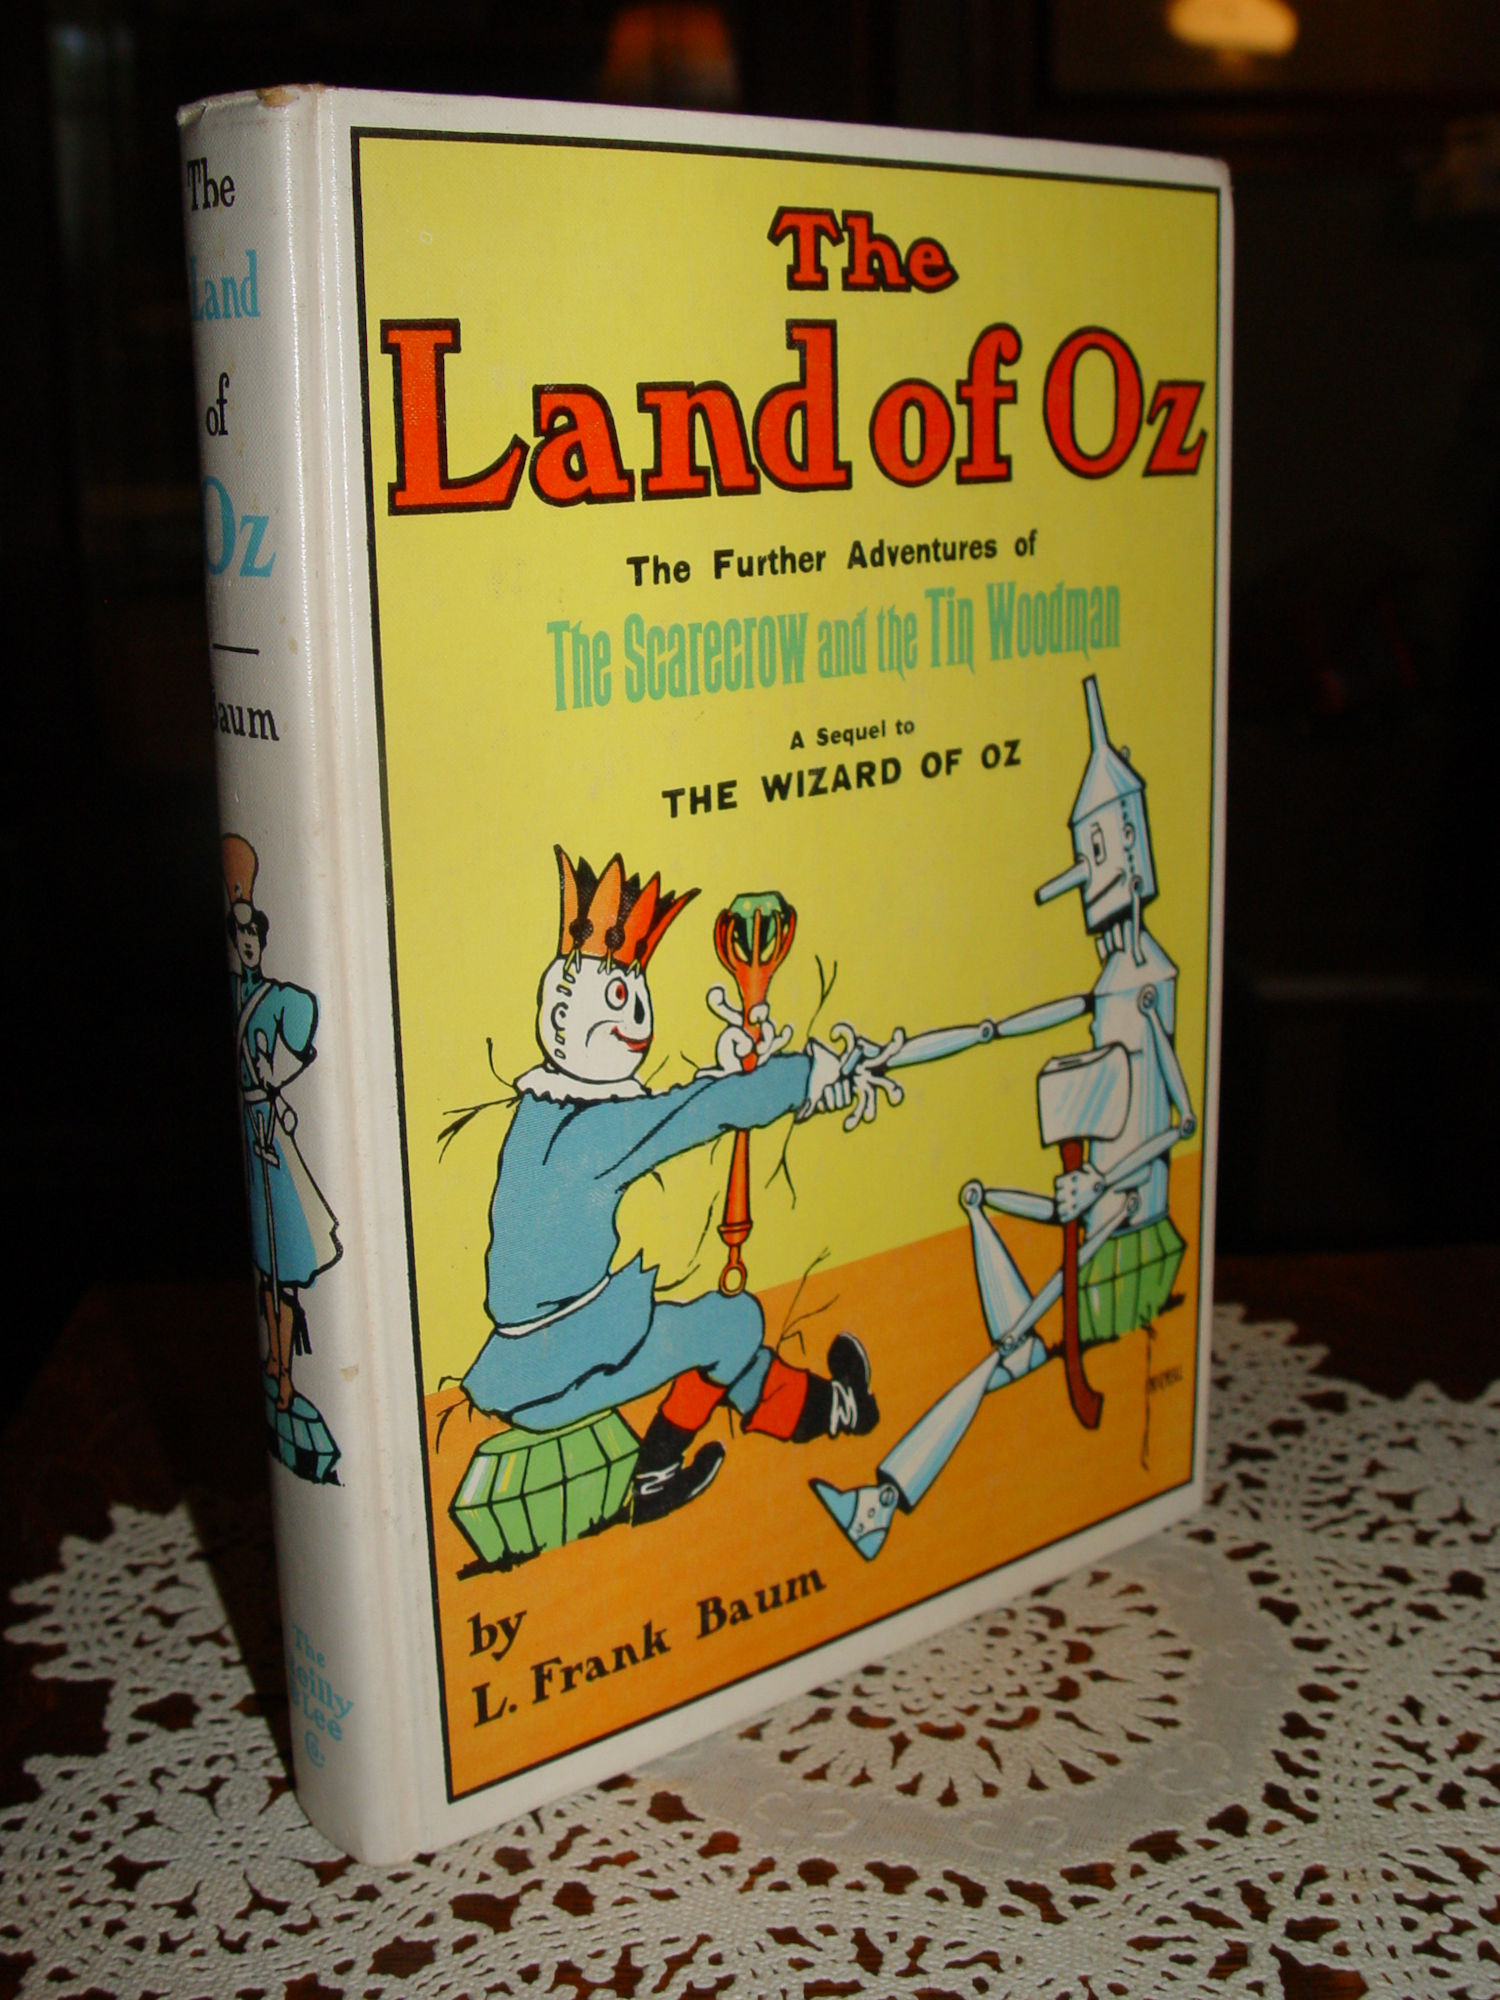 The
                Land of Oz; The Scarecrow and the Tin Woodman by L.
                Frank Baum